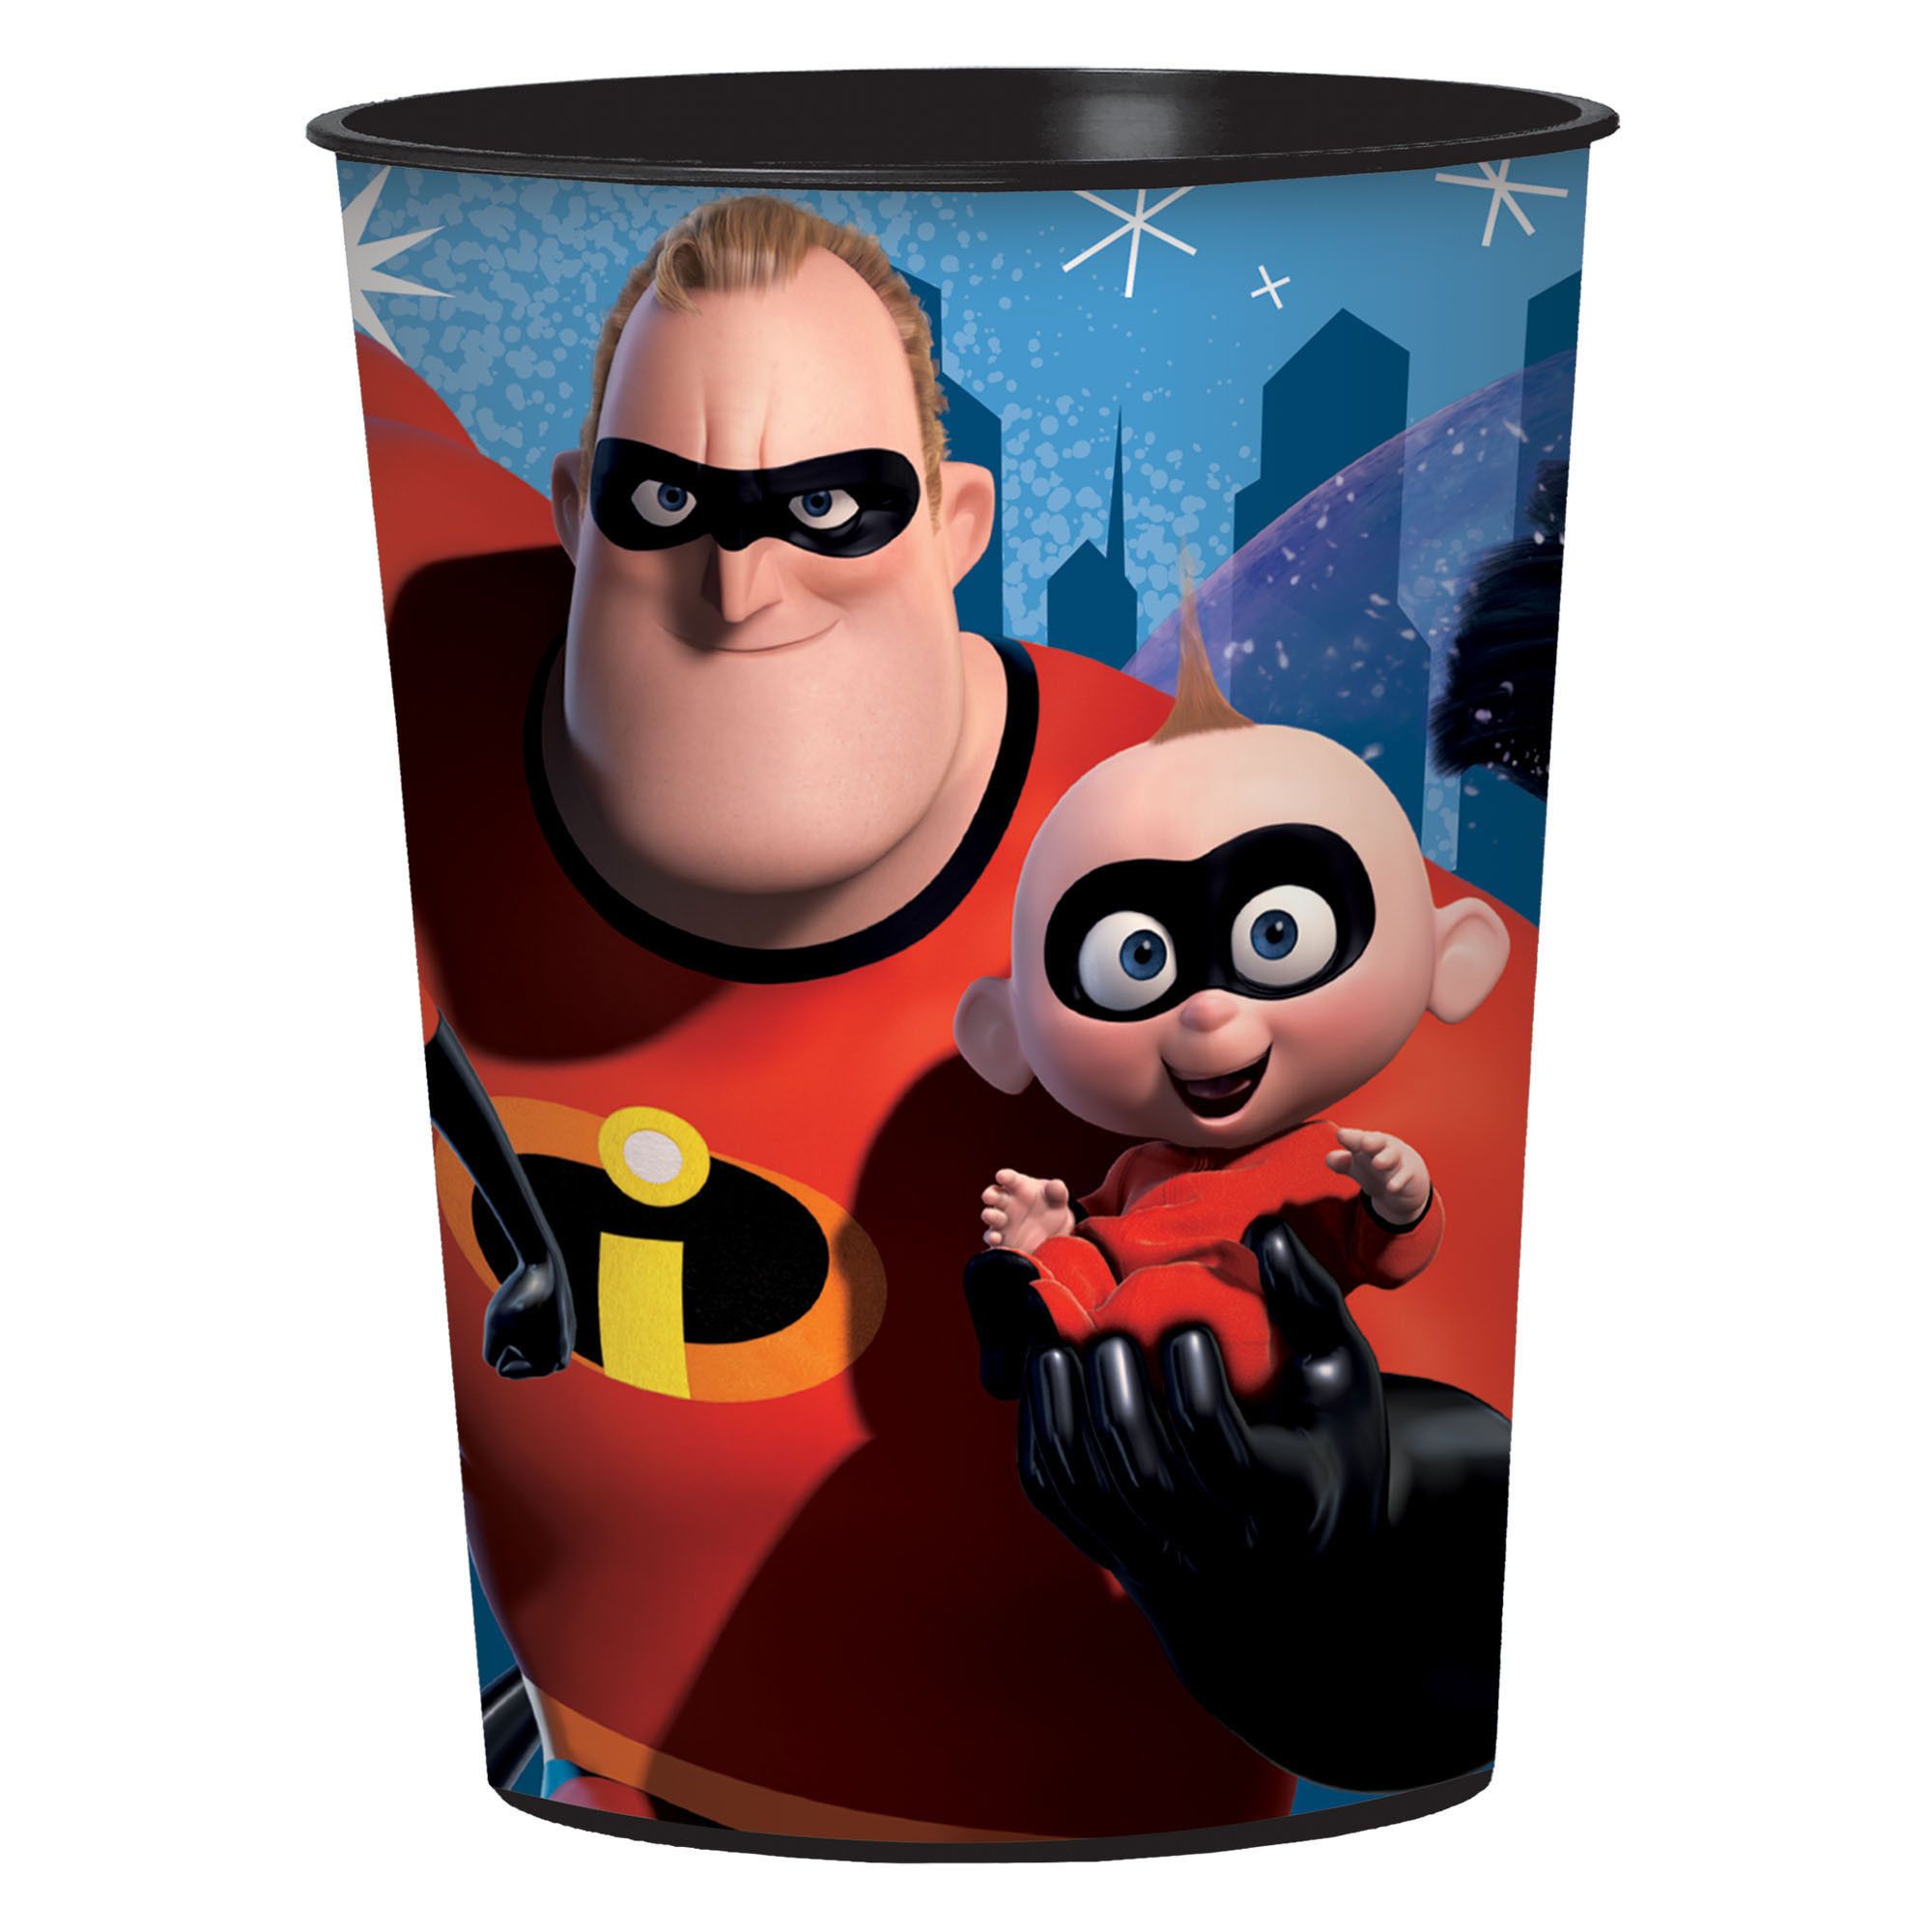 NEW The Incredibles 2 Grab & Go Play Pack - Party Favor, Prize Box, Travel,  Gift